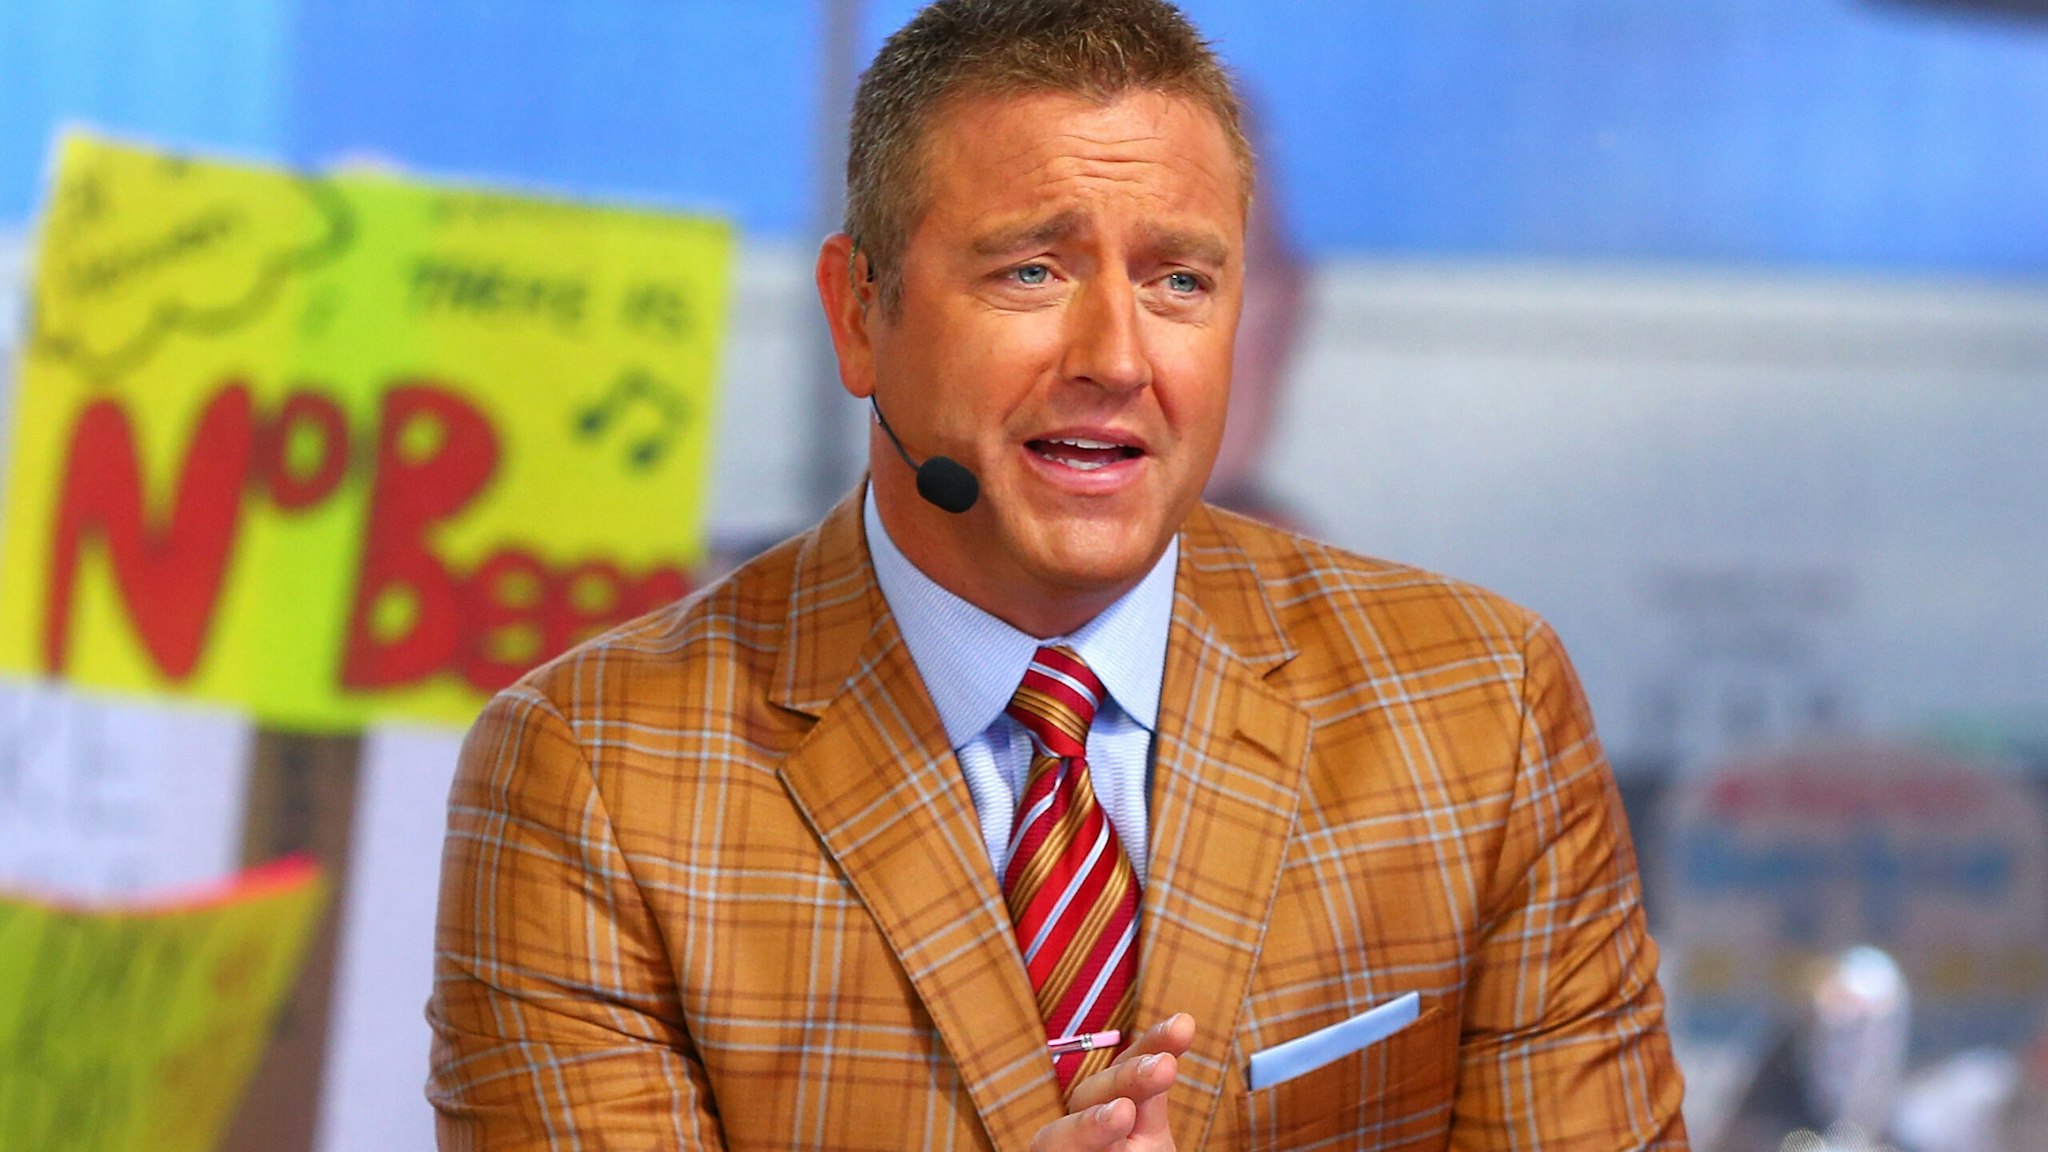 NEW YORK, NY - SEPTEMBER 23: GameDay host Kirk Herbstreit is seen during ESPN's College GameDay show at Times Square on September 23, 2017 in New York City.